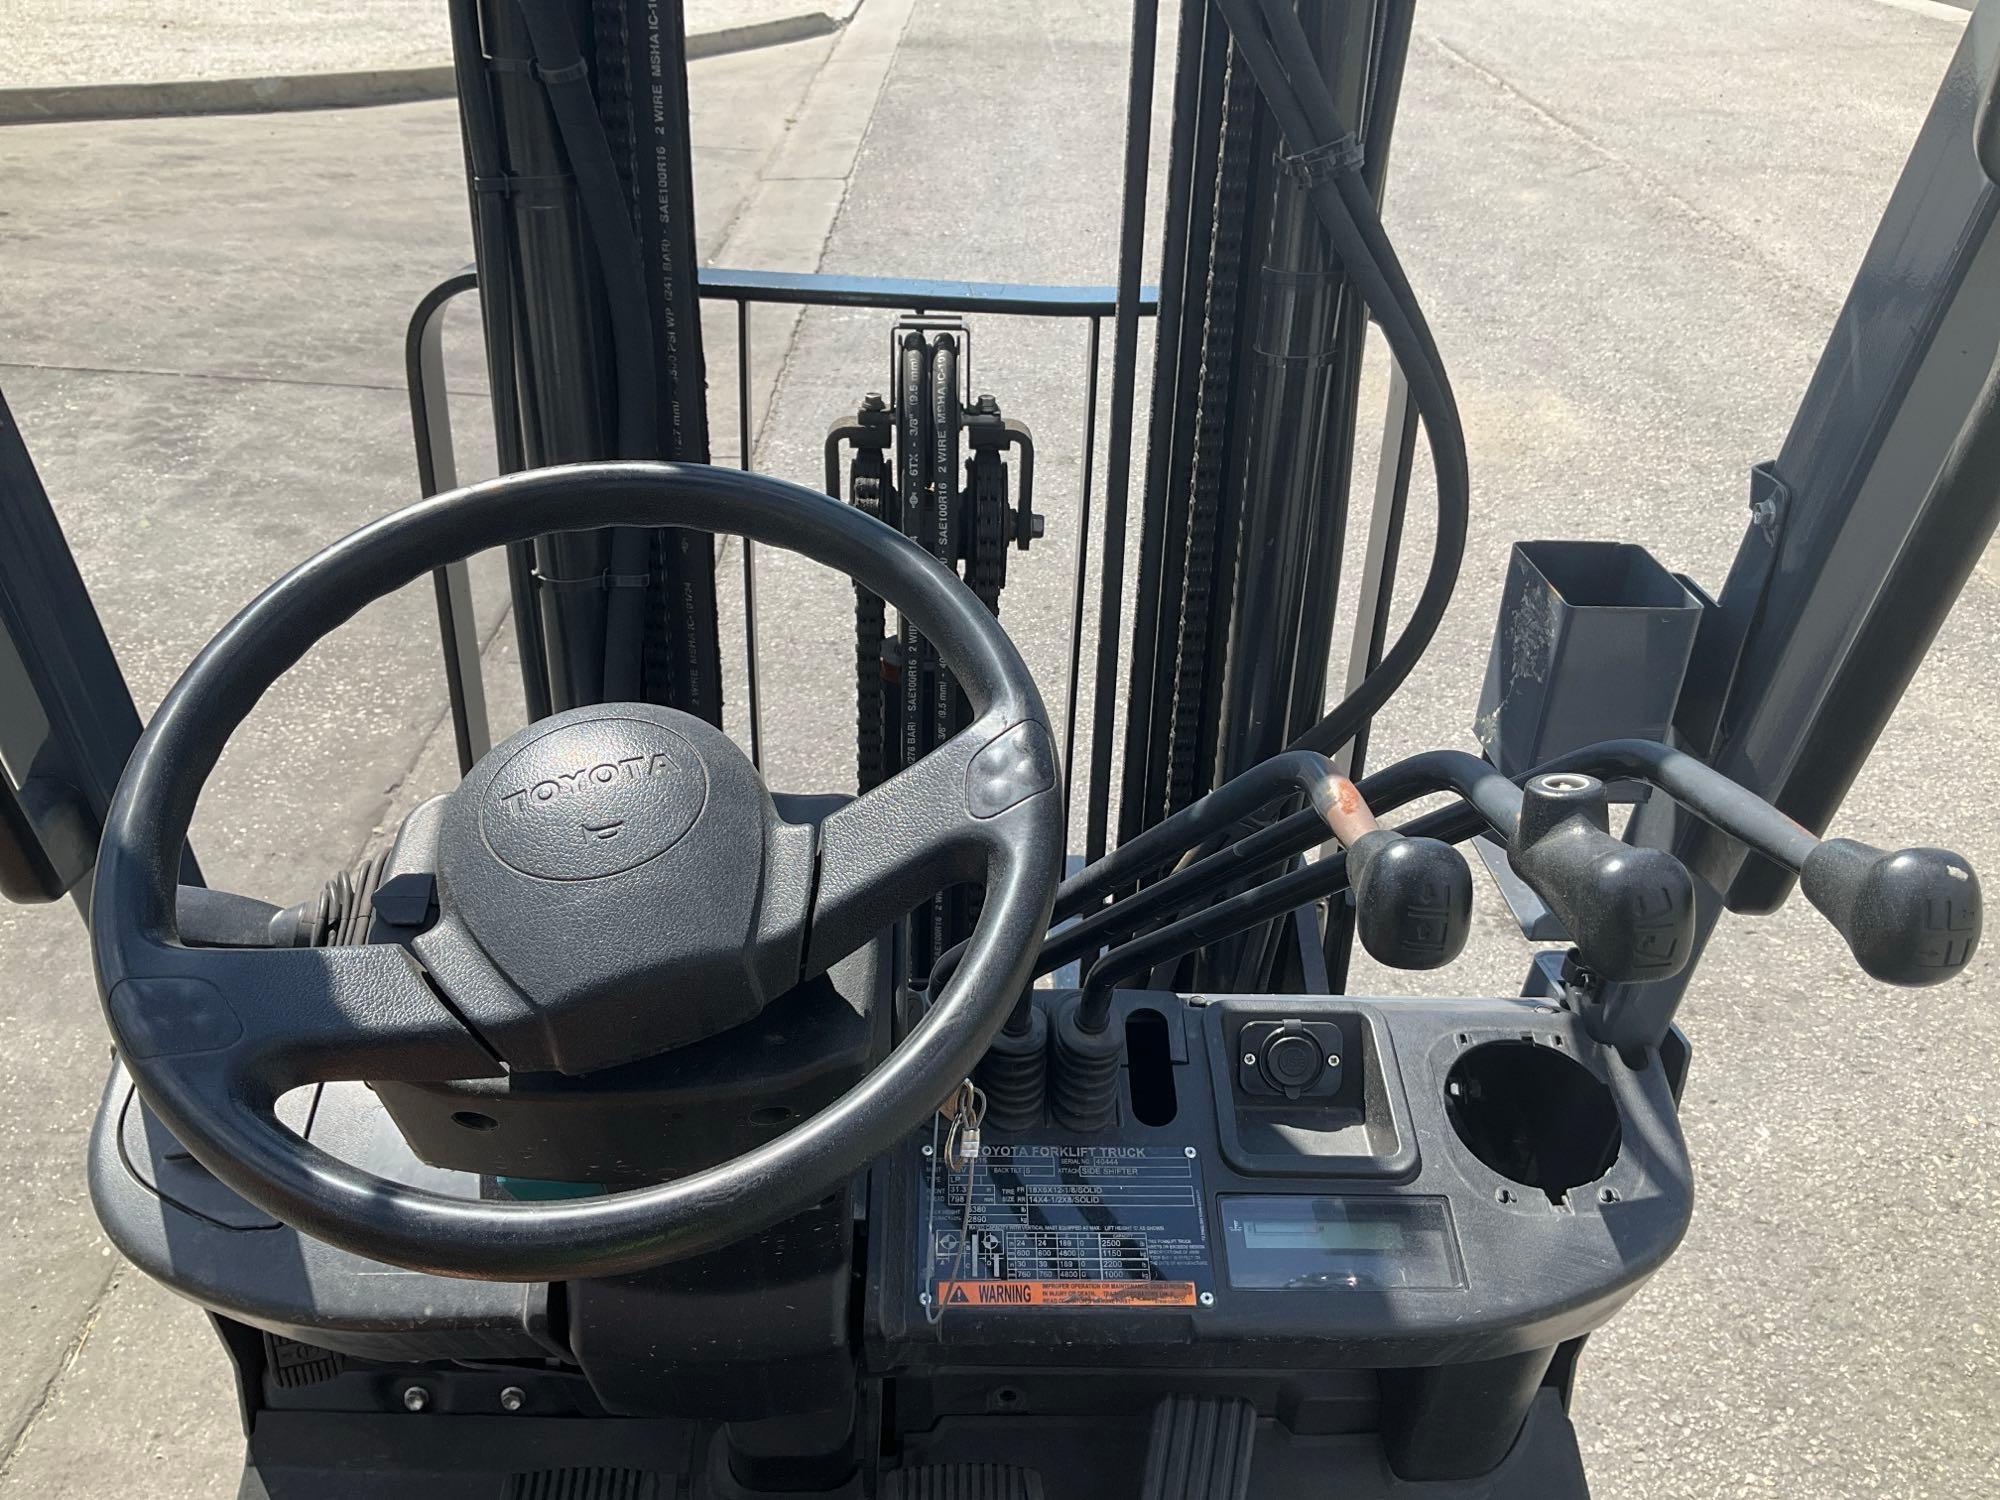 2019 TOYOTA FORKLIFT MODEL 8FGCU15, LP POWERED, APPROX MAX CAPACITY 2500, MAX HEIGHT 189in, TILT,